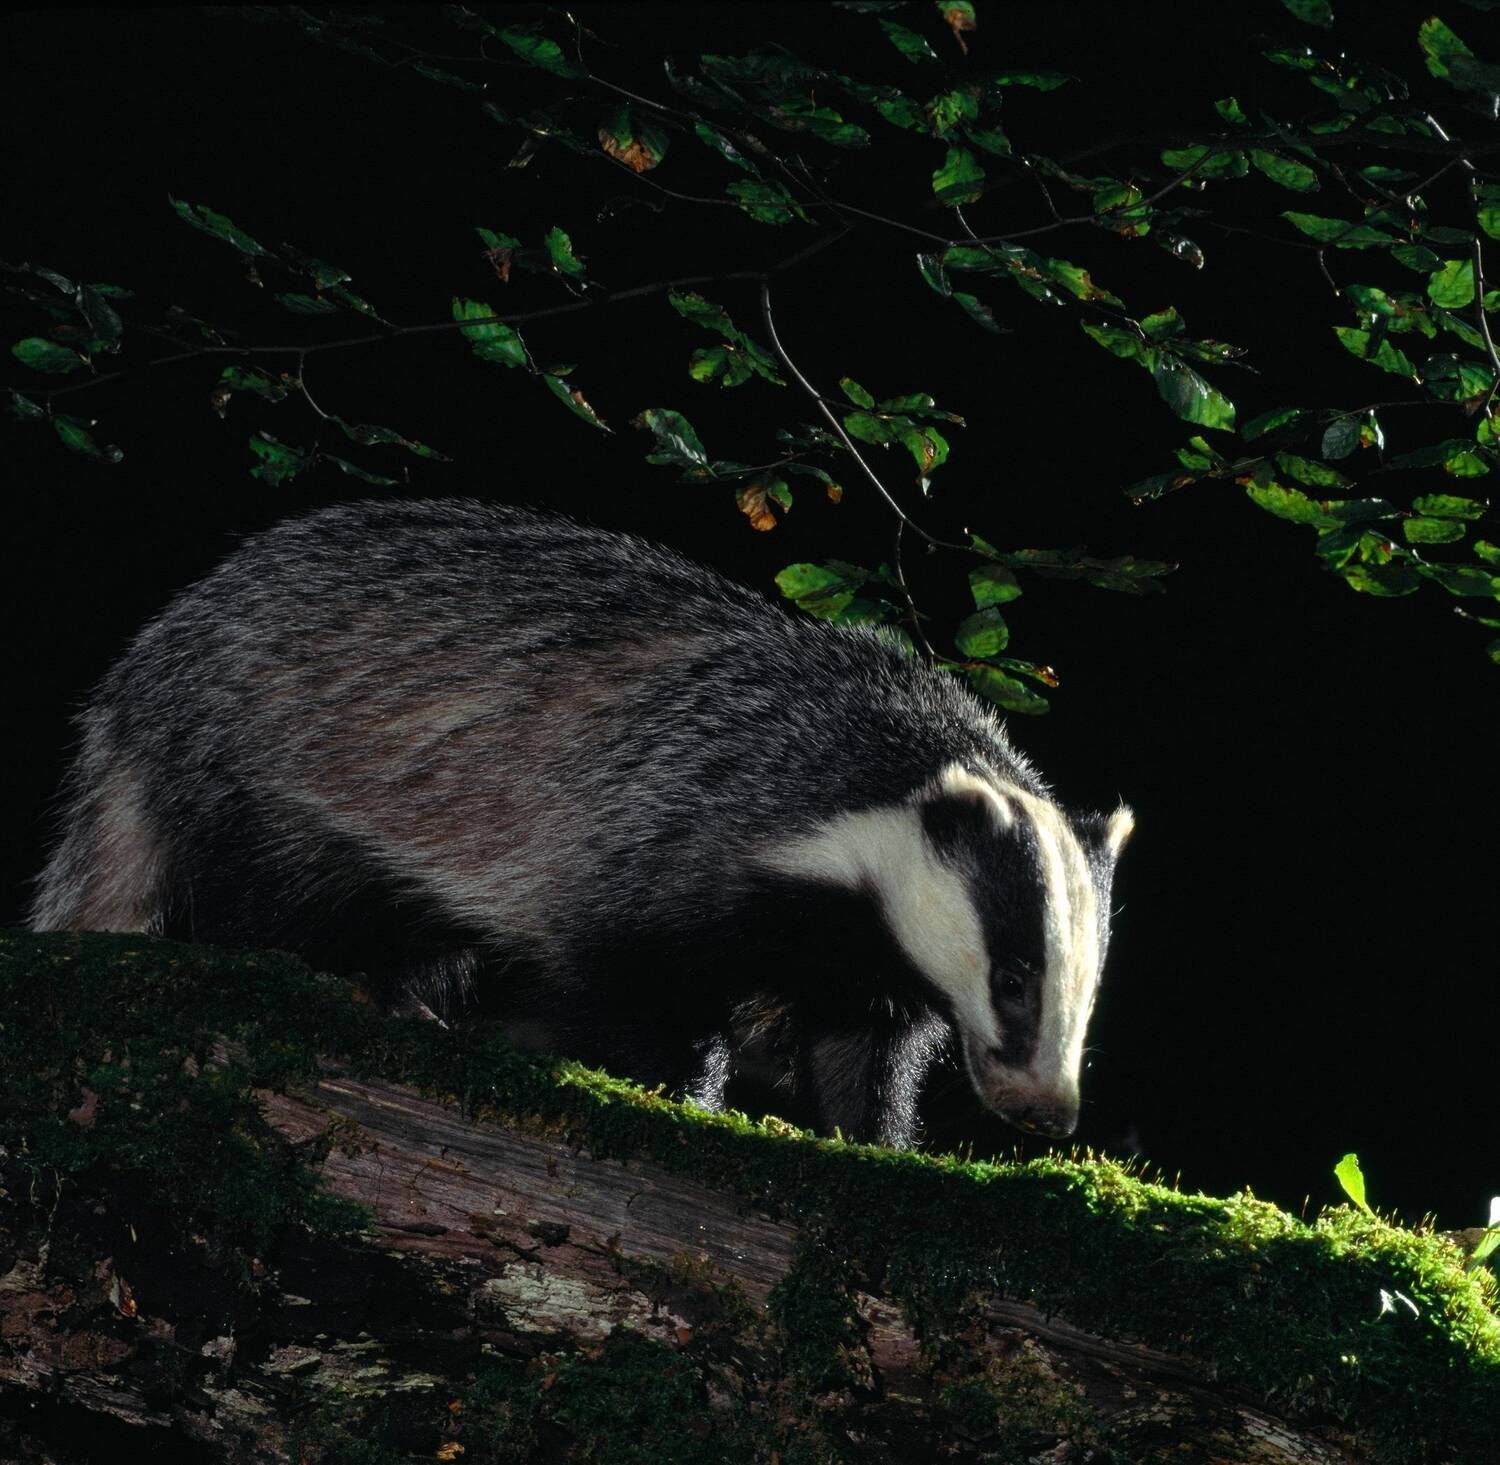 A large badger walks beside a long, moss-covered log in woodland, in very low light.